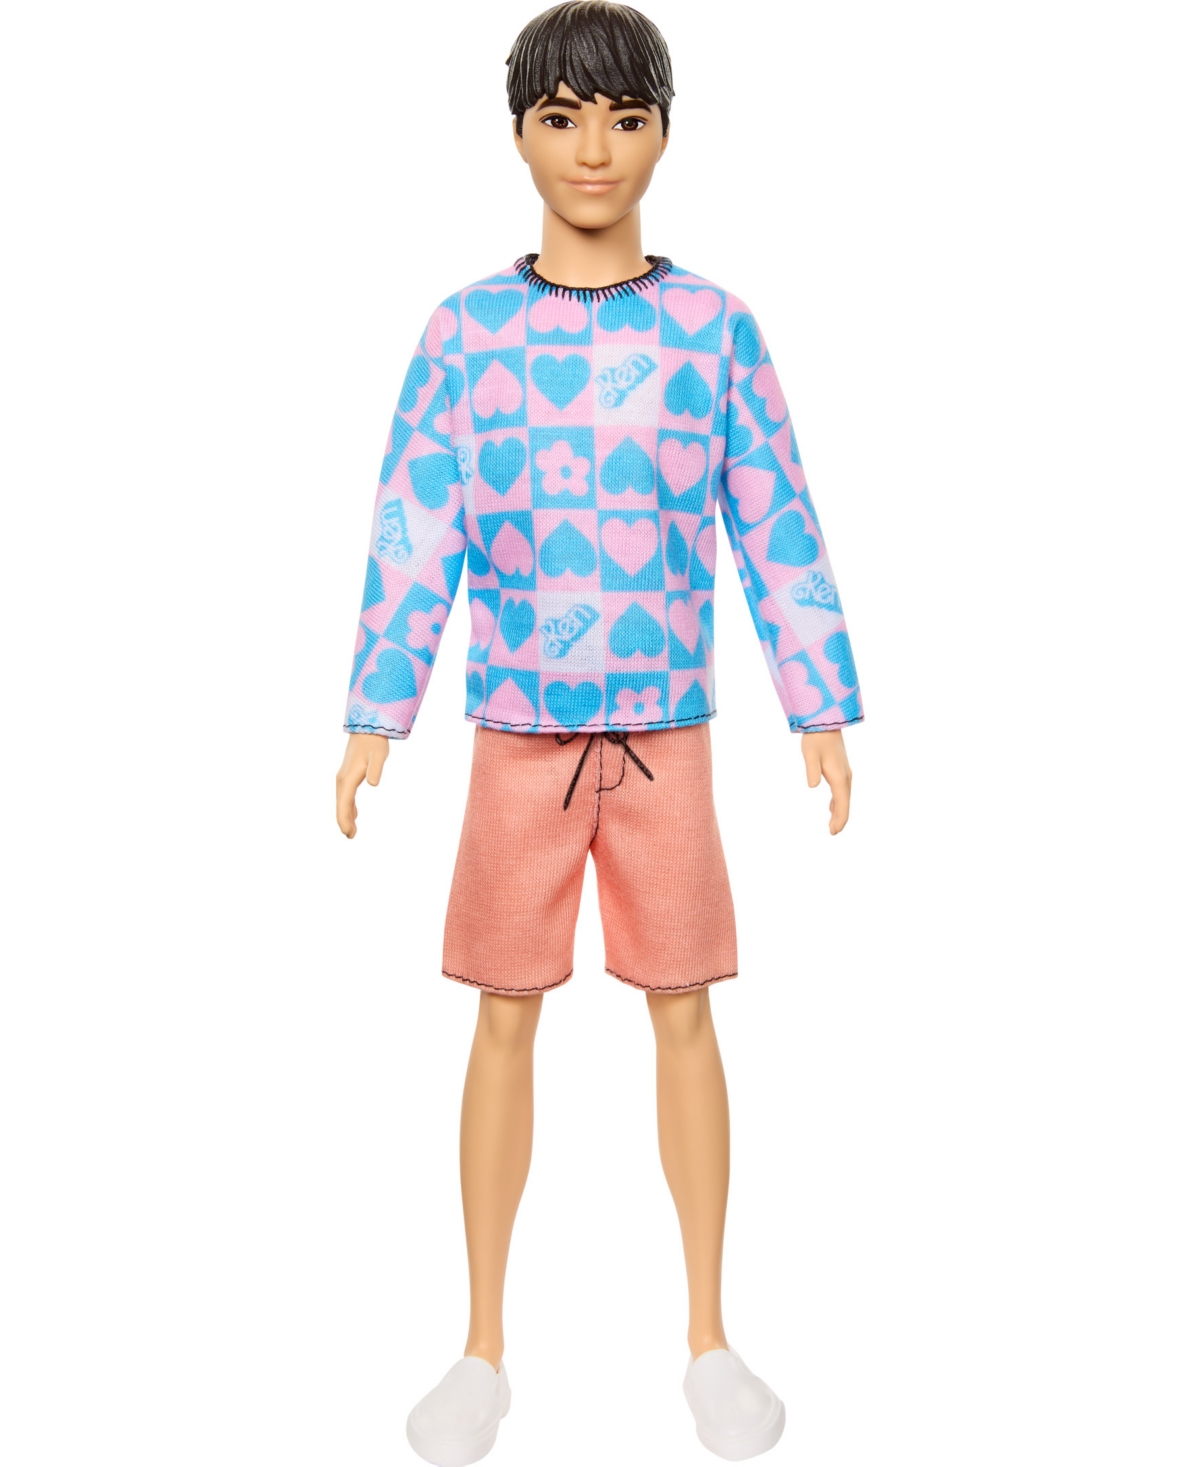 Shop Barbie Fashionistas Ken Doll 219 With Slender Body And Removable Outfit In Multi